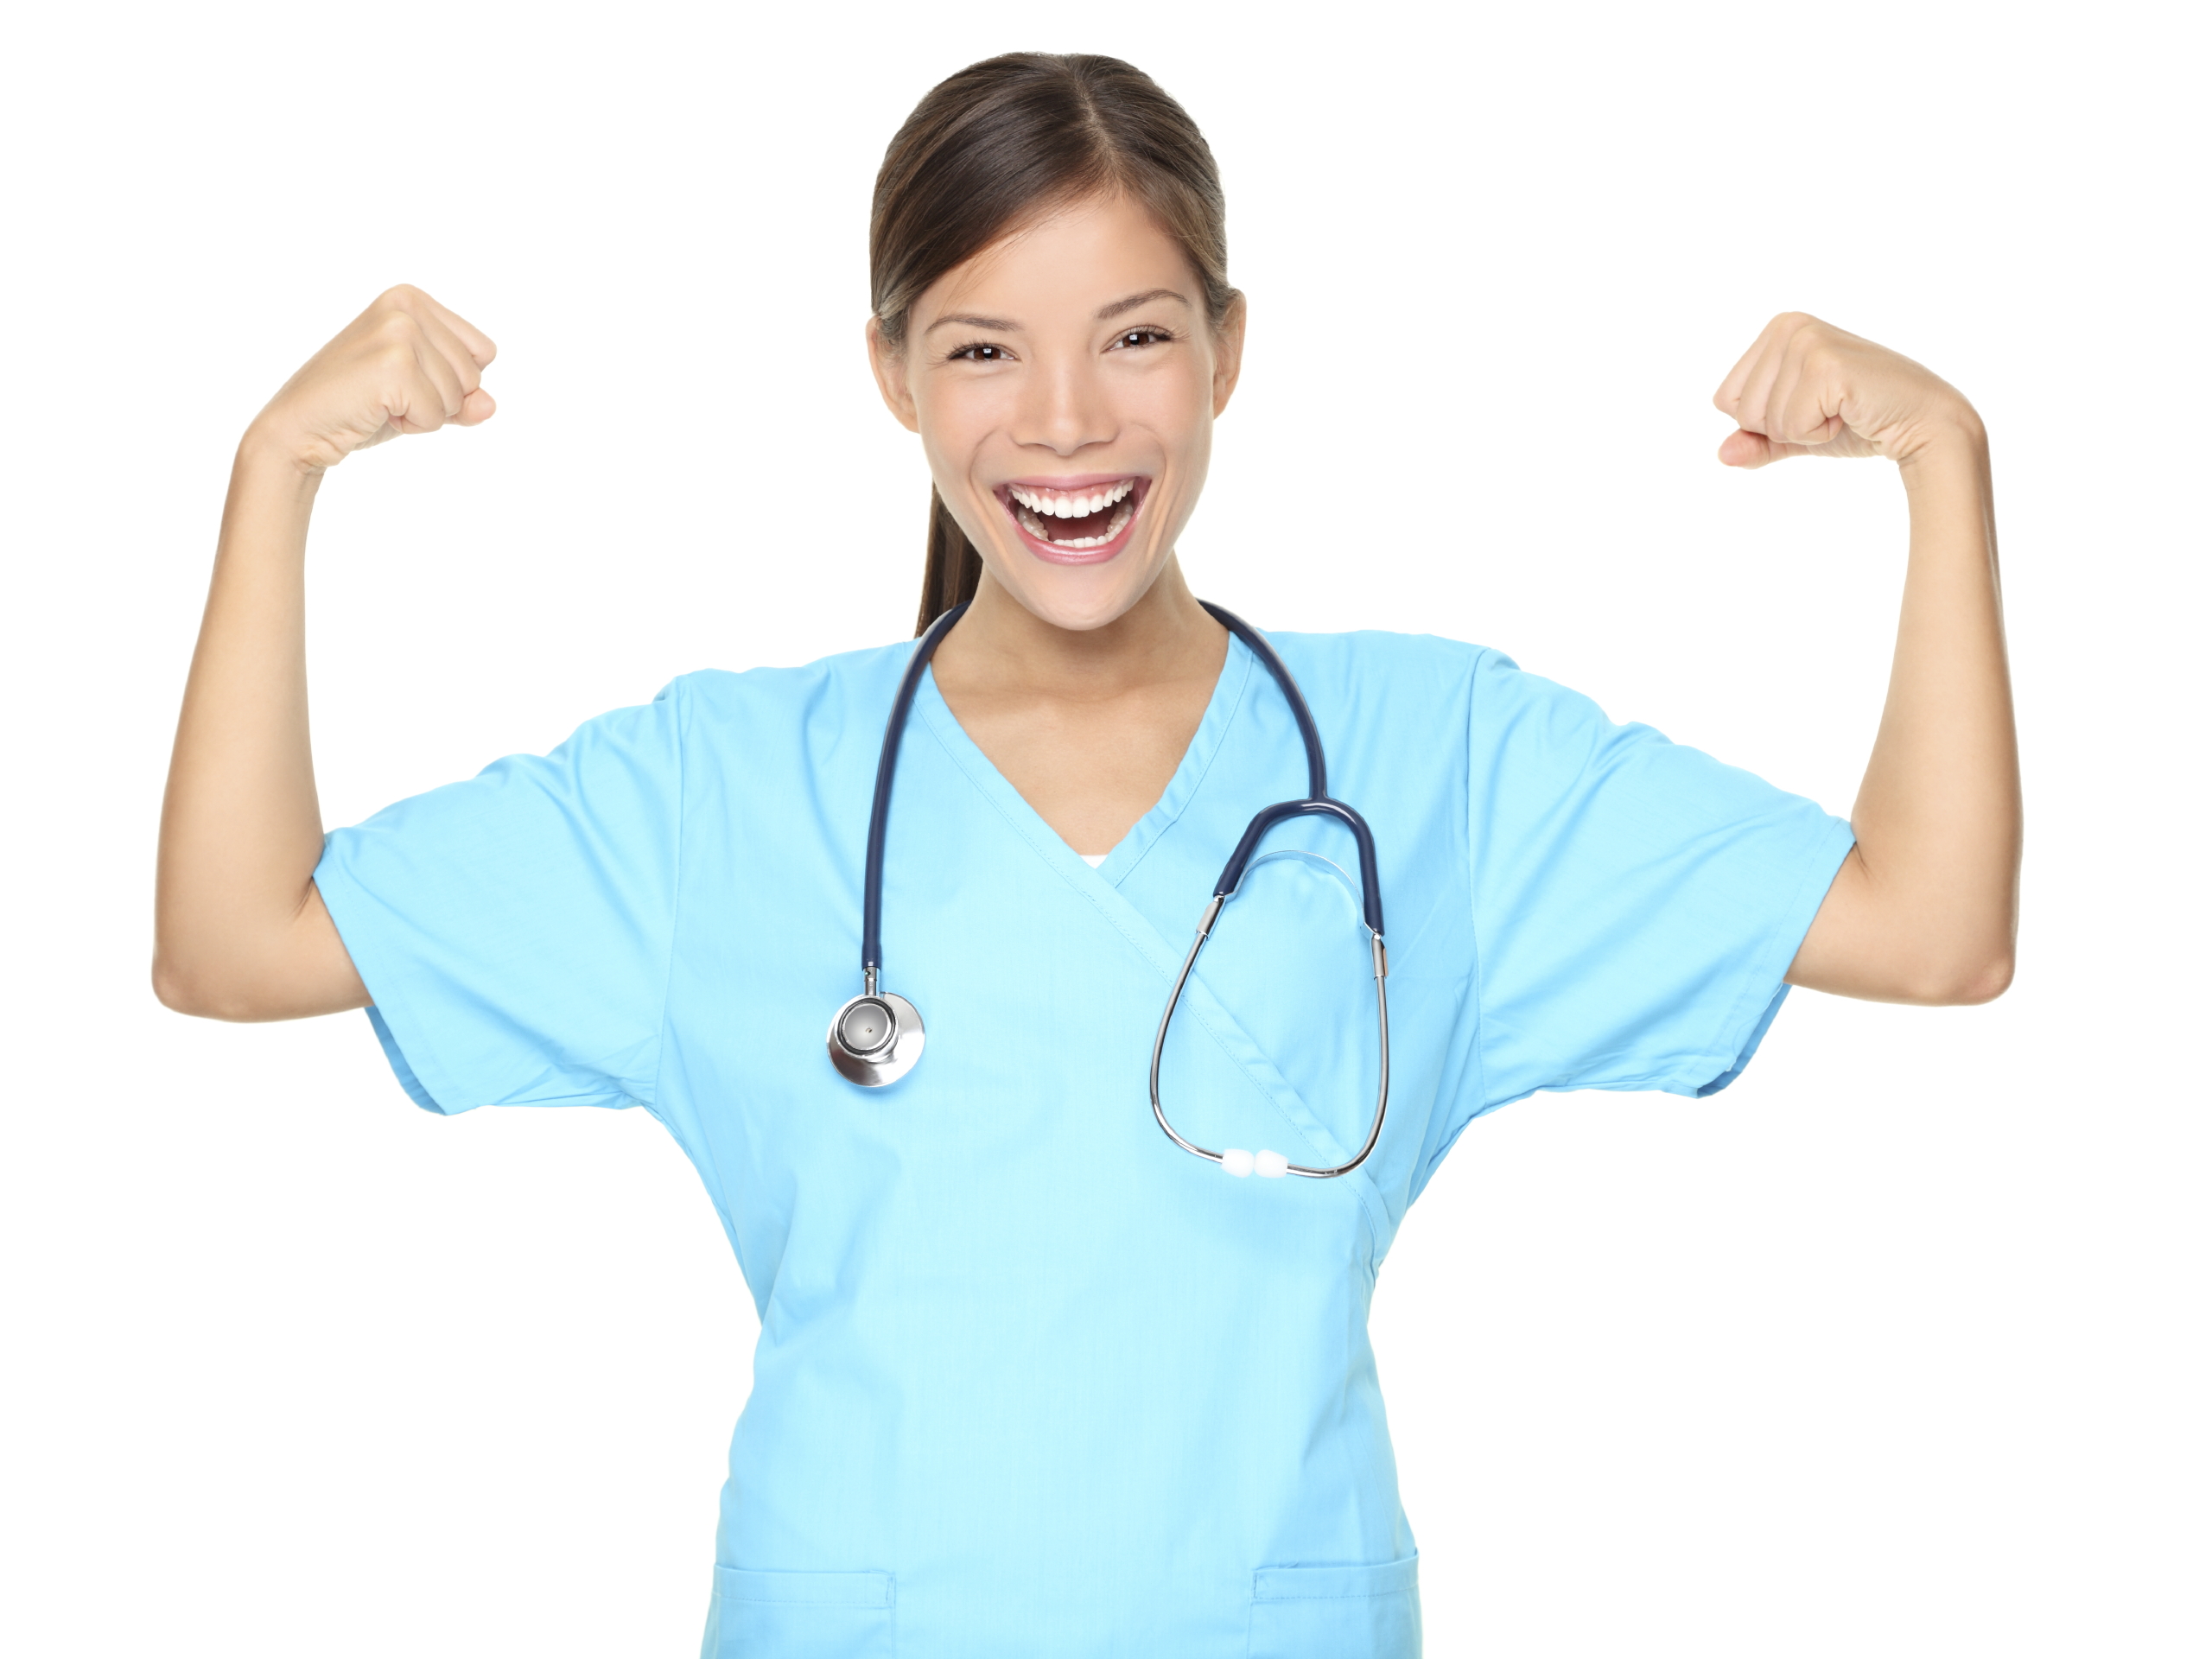 Earning Your Nursing Degree While Working